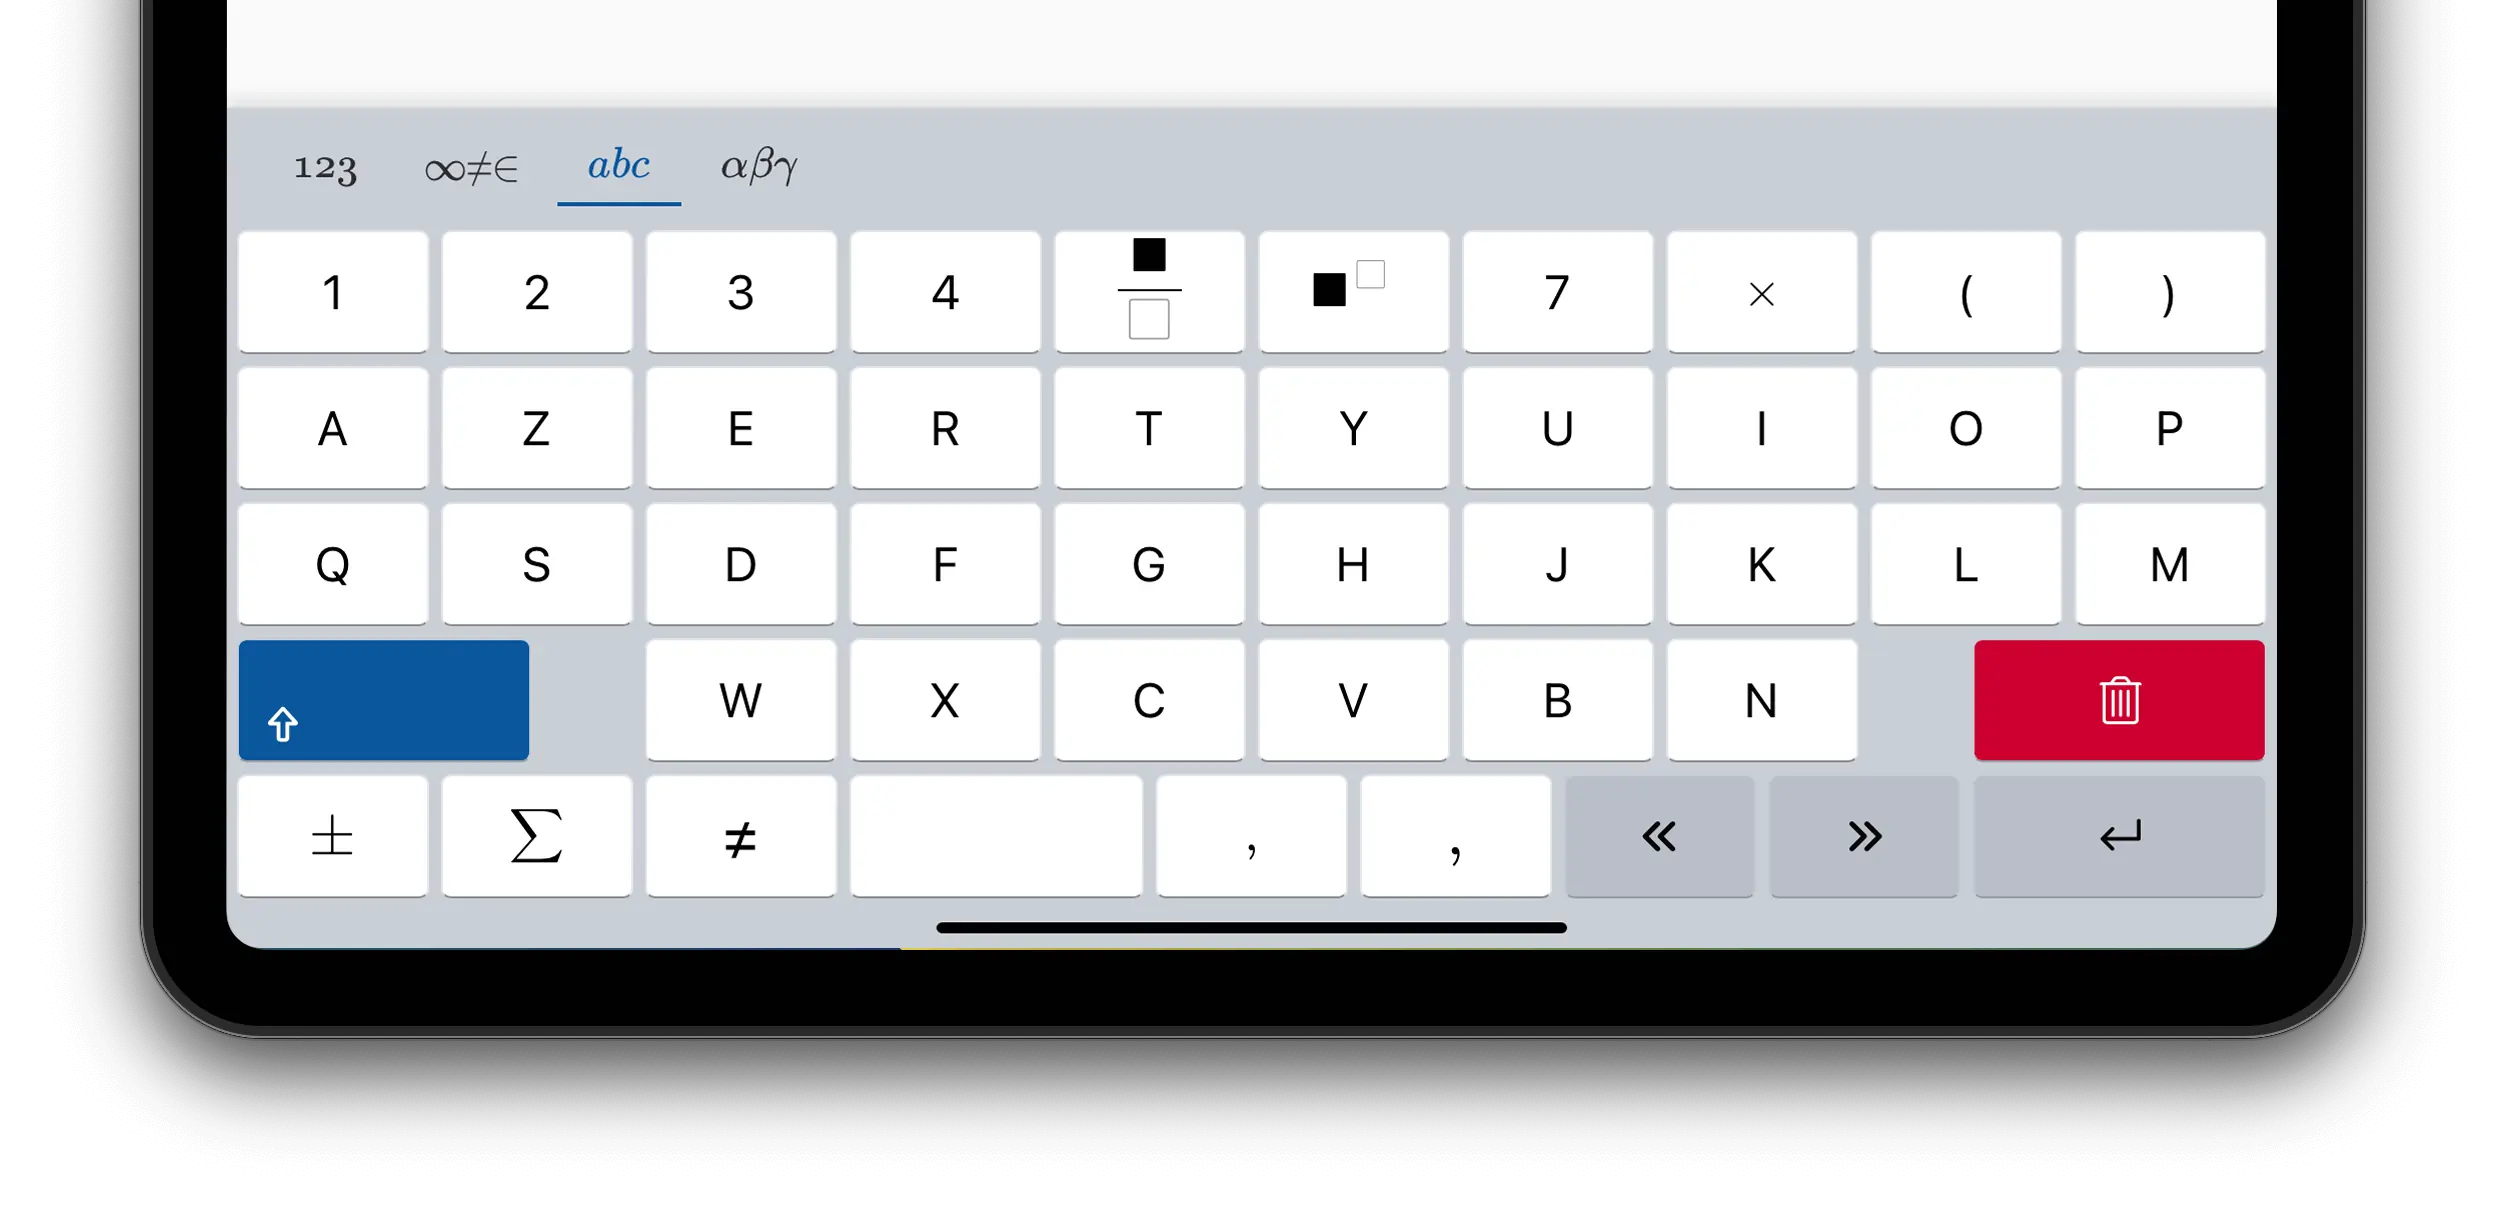 AZERTY layout, shifted